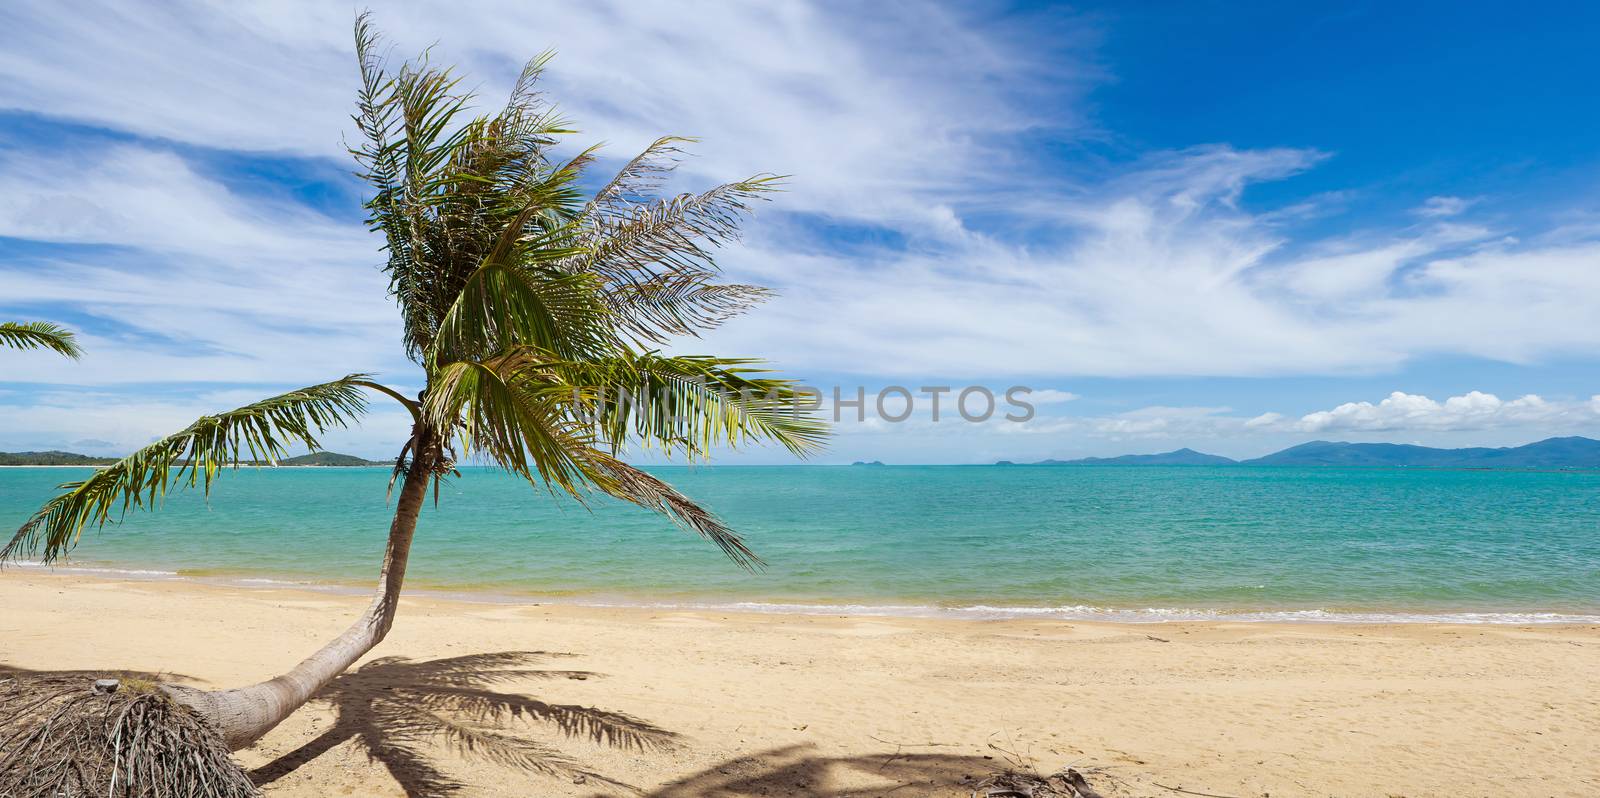 Wide view of tranquil tropical island beach